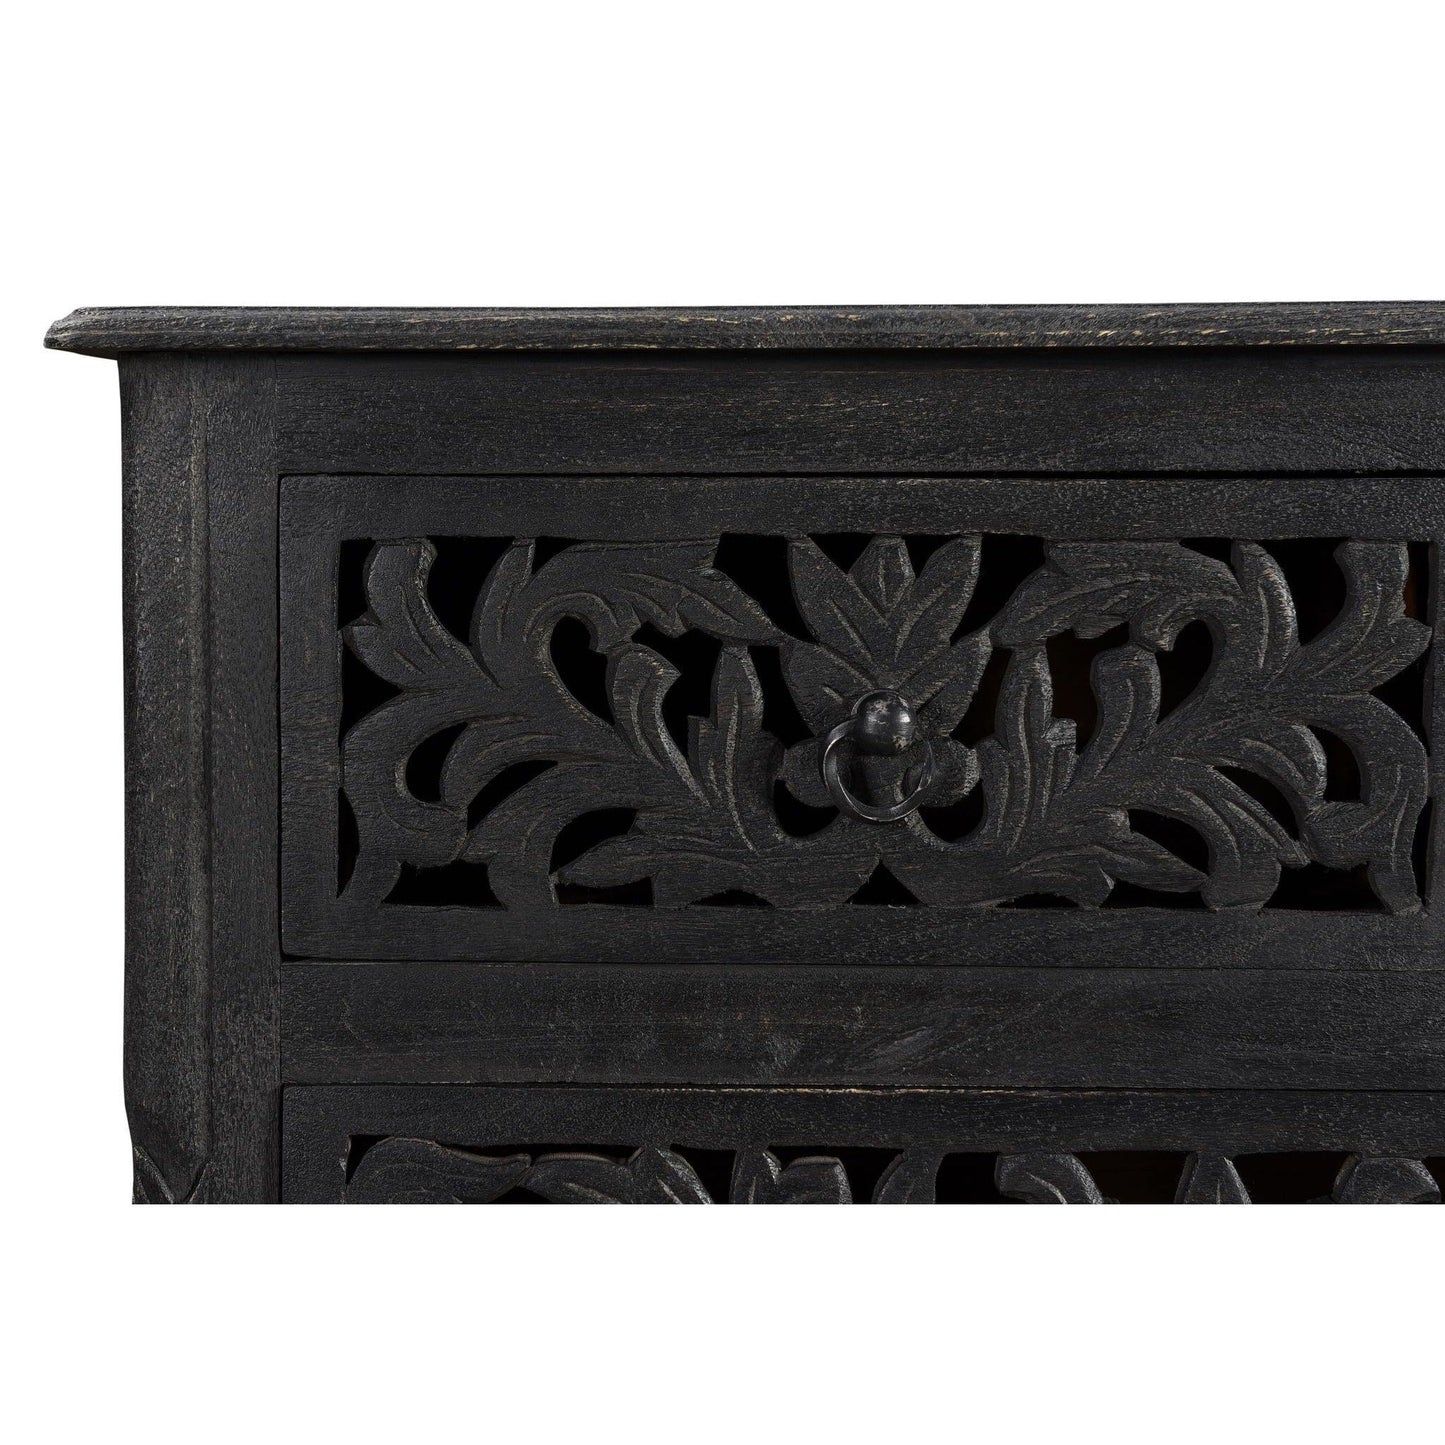 Lawrence 57 inches Floral Carved Dresser in Distressed Black - Sideboards and Things Brand_LOOMLAN Home, Color_Black, Features_Handmade, Features_Handmade/Handcarved, Features_Repurposed Materials, Finish_Distressed, Height_30-40, Hinges, Materials_Reclaimed Wood, Materials_Wood, Product Type_Dresser, Shelf Material_Wood, Width_50-60